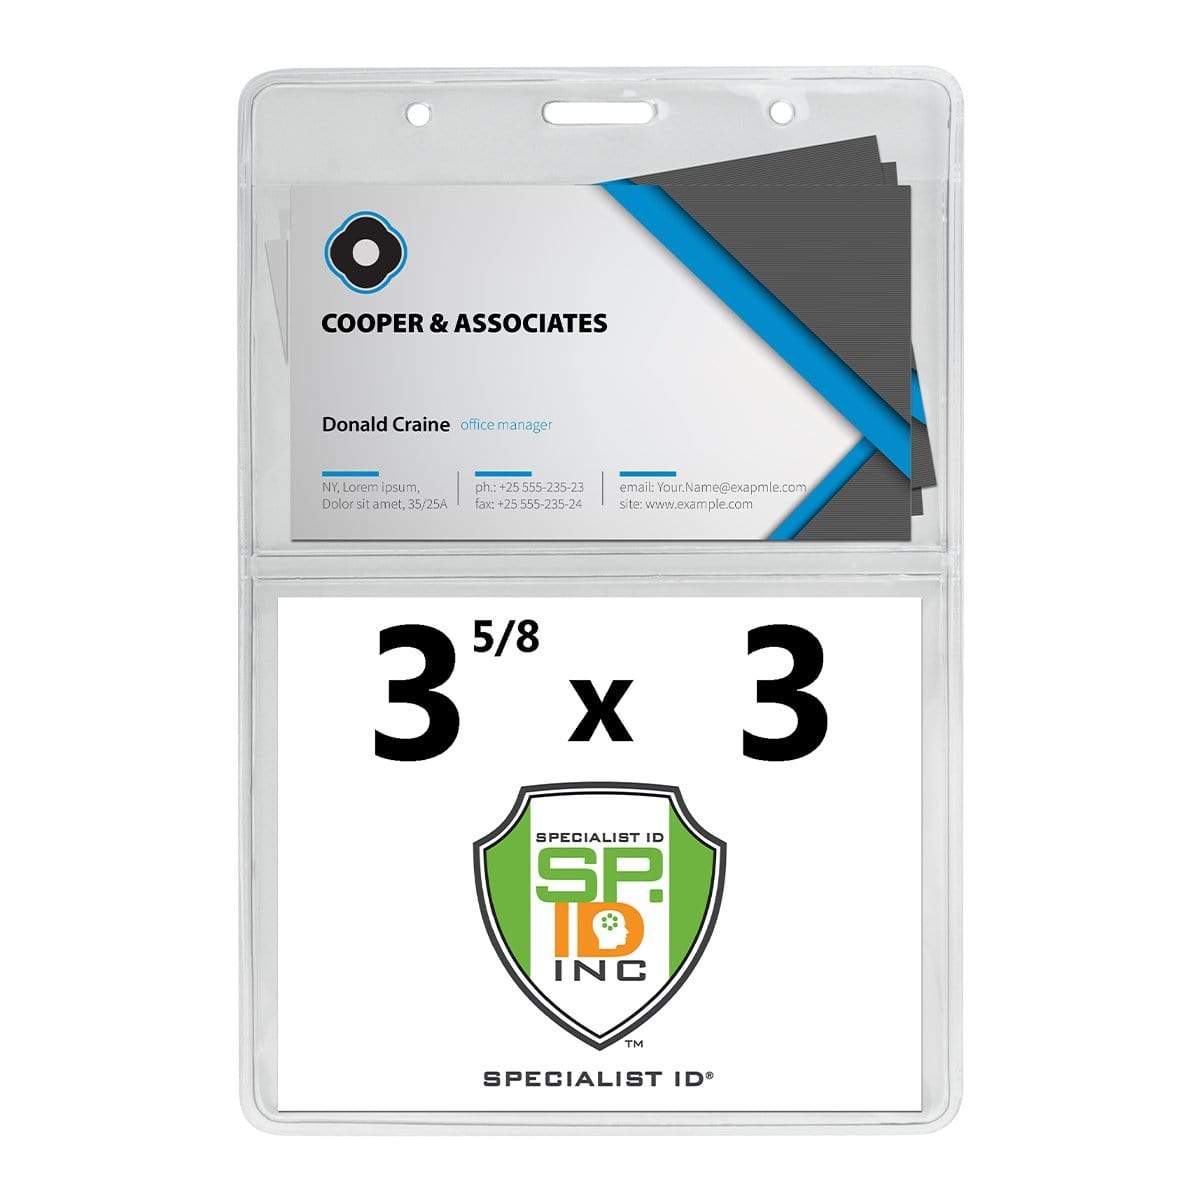 3 5/8 x 5 Special Event Badge & Credential Badge Holder with Business Card Pocket on Back (P/N 306-2P46) 306-2P46